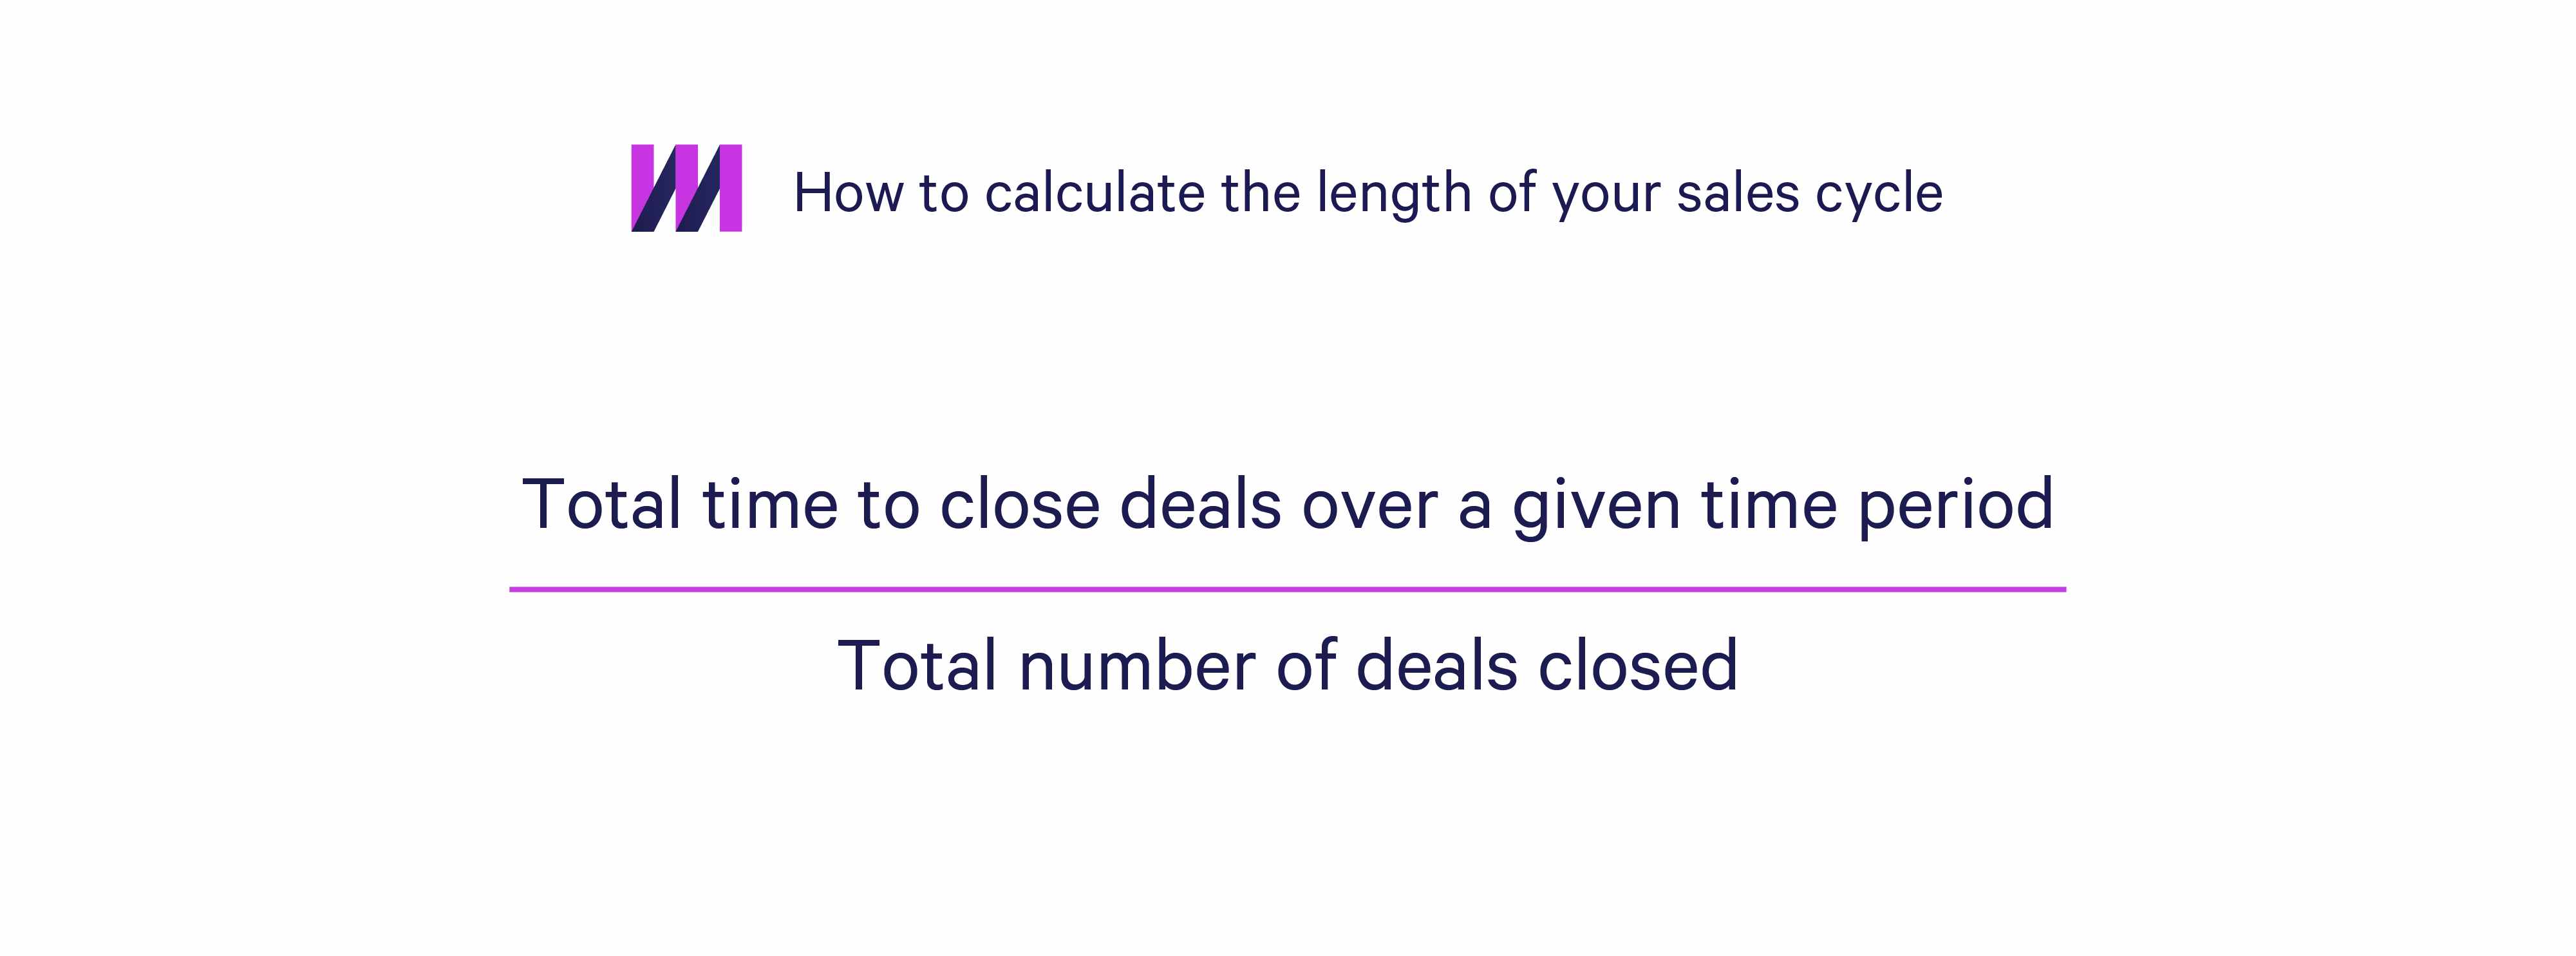 How to calculate the length of your sales cycle